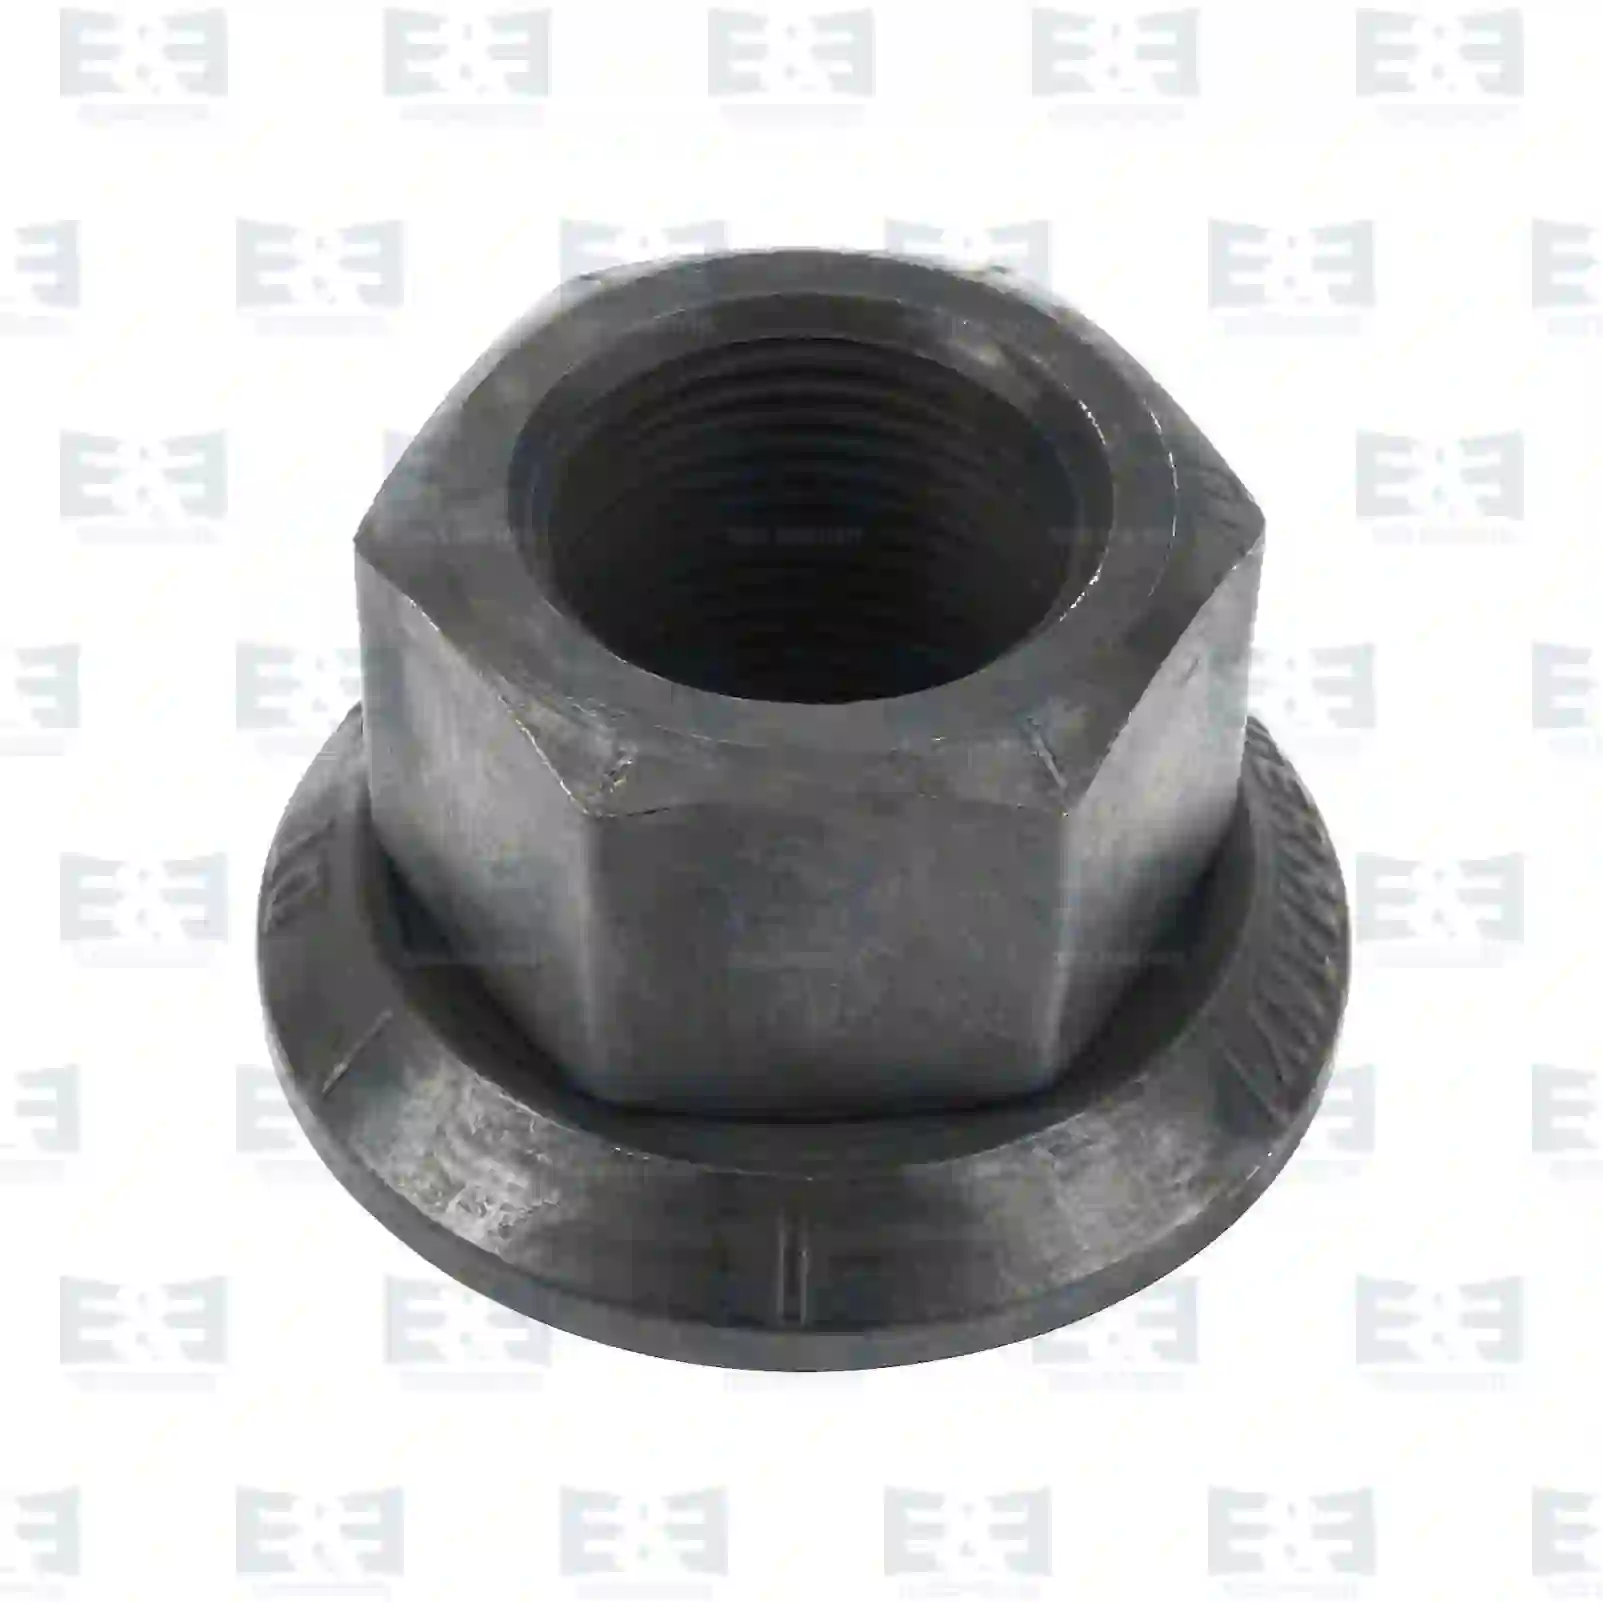 Wheel Bolt Kit Wheel nut, surface: phosphated, EE No 2E2284943 ,  oem no:0252192210, 0252192310, 0620652, 0652575, 1241815, 1356737, 1358990, 1402360, 1455046, 1826088, 620652, 652575, 04459603, 41031725, 41036367, 04459603, 41031725, 42117503, 4459603, 81440500123, 81455030001, 81455030026, 81455030049, 81455030056, 3454007024, 3454007124, 3854000124, 6174000024, 21203099, 21218643, 4247301200, 0374361151, 6374361151, 8241999726, 947972, 2V5601295, ZG41978-0008 E&E Truck Spare Parts | Truck Spare Parts, Auotomotive Spare Parts